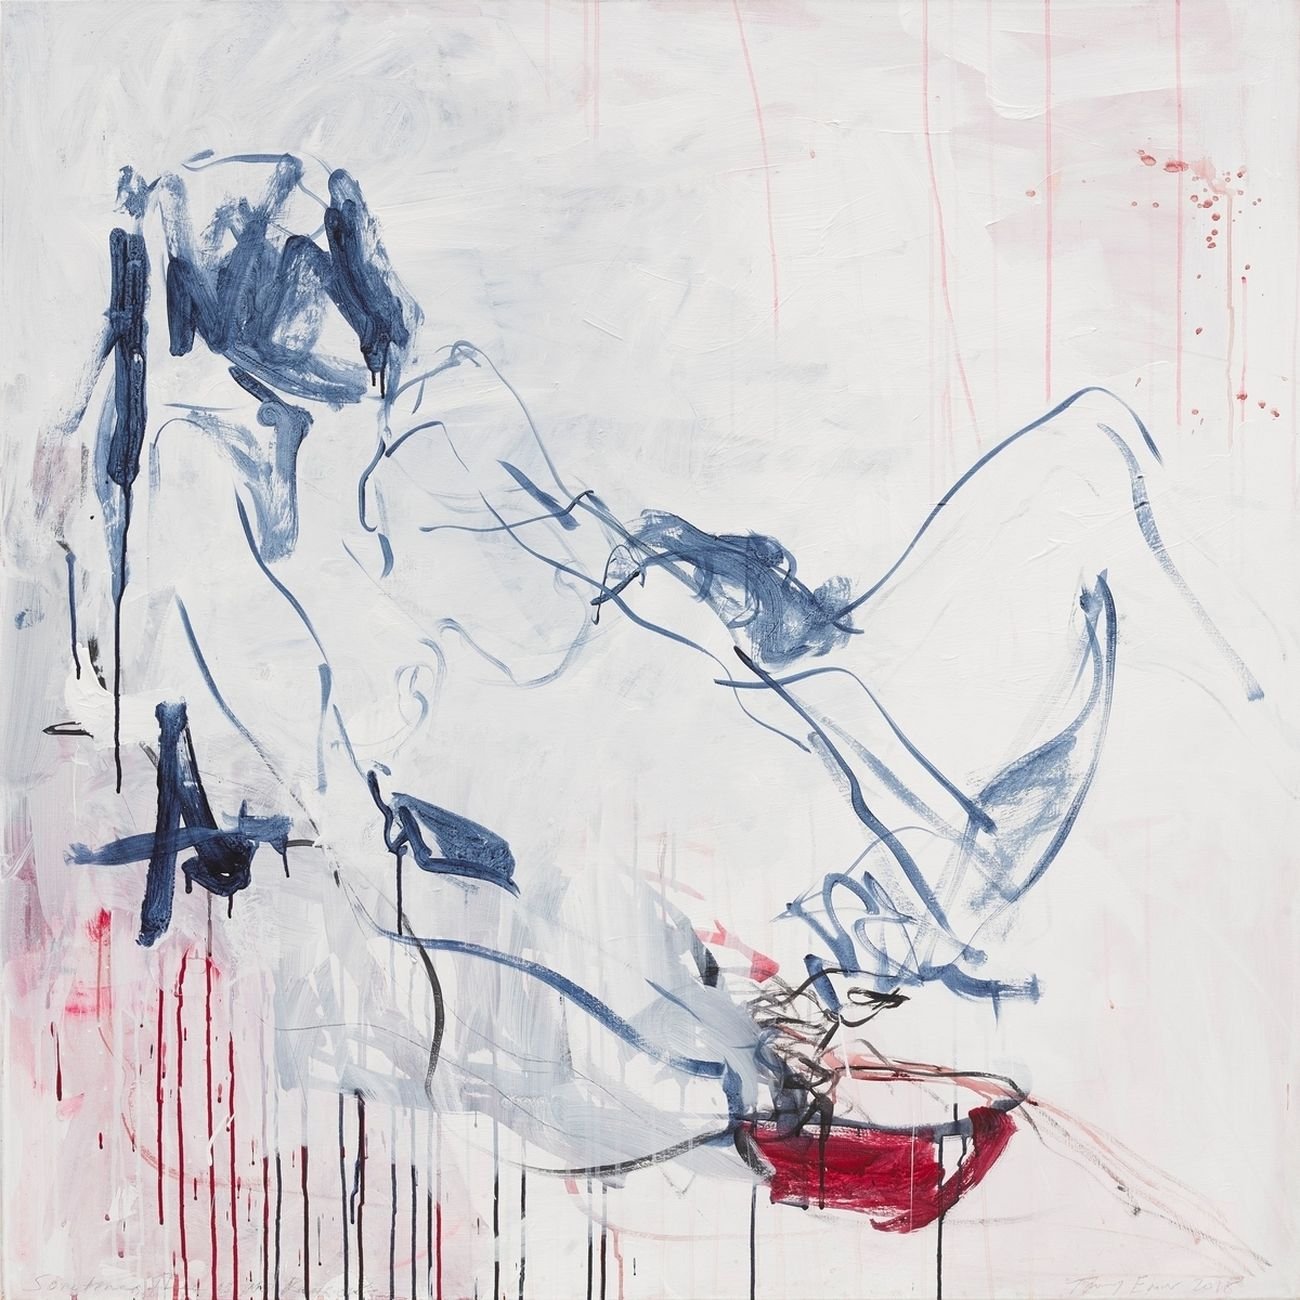 Tracey Emin, Sometimes There Is No Reason, 2018. Acrylic on canvas. Private Collection, Courtesy Sabsay © Tracey Emin. All rights reserved, DACS/Artimage 2022 © Tracey Emin. All Rights Reserved / Bildrecht, Vienna 2022